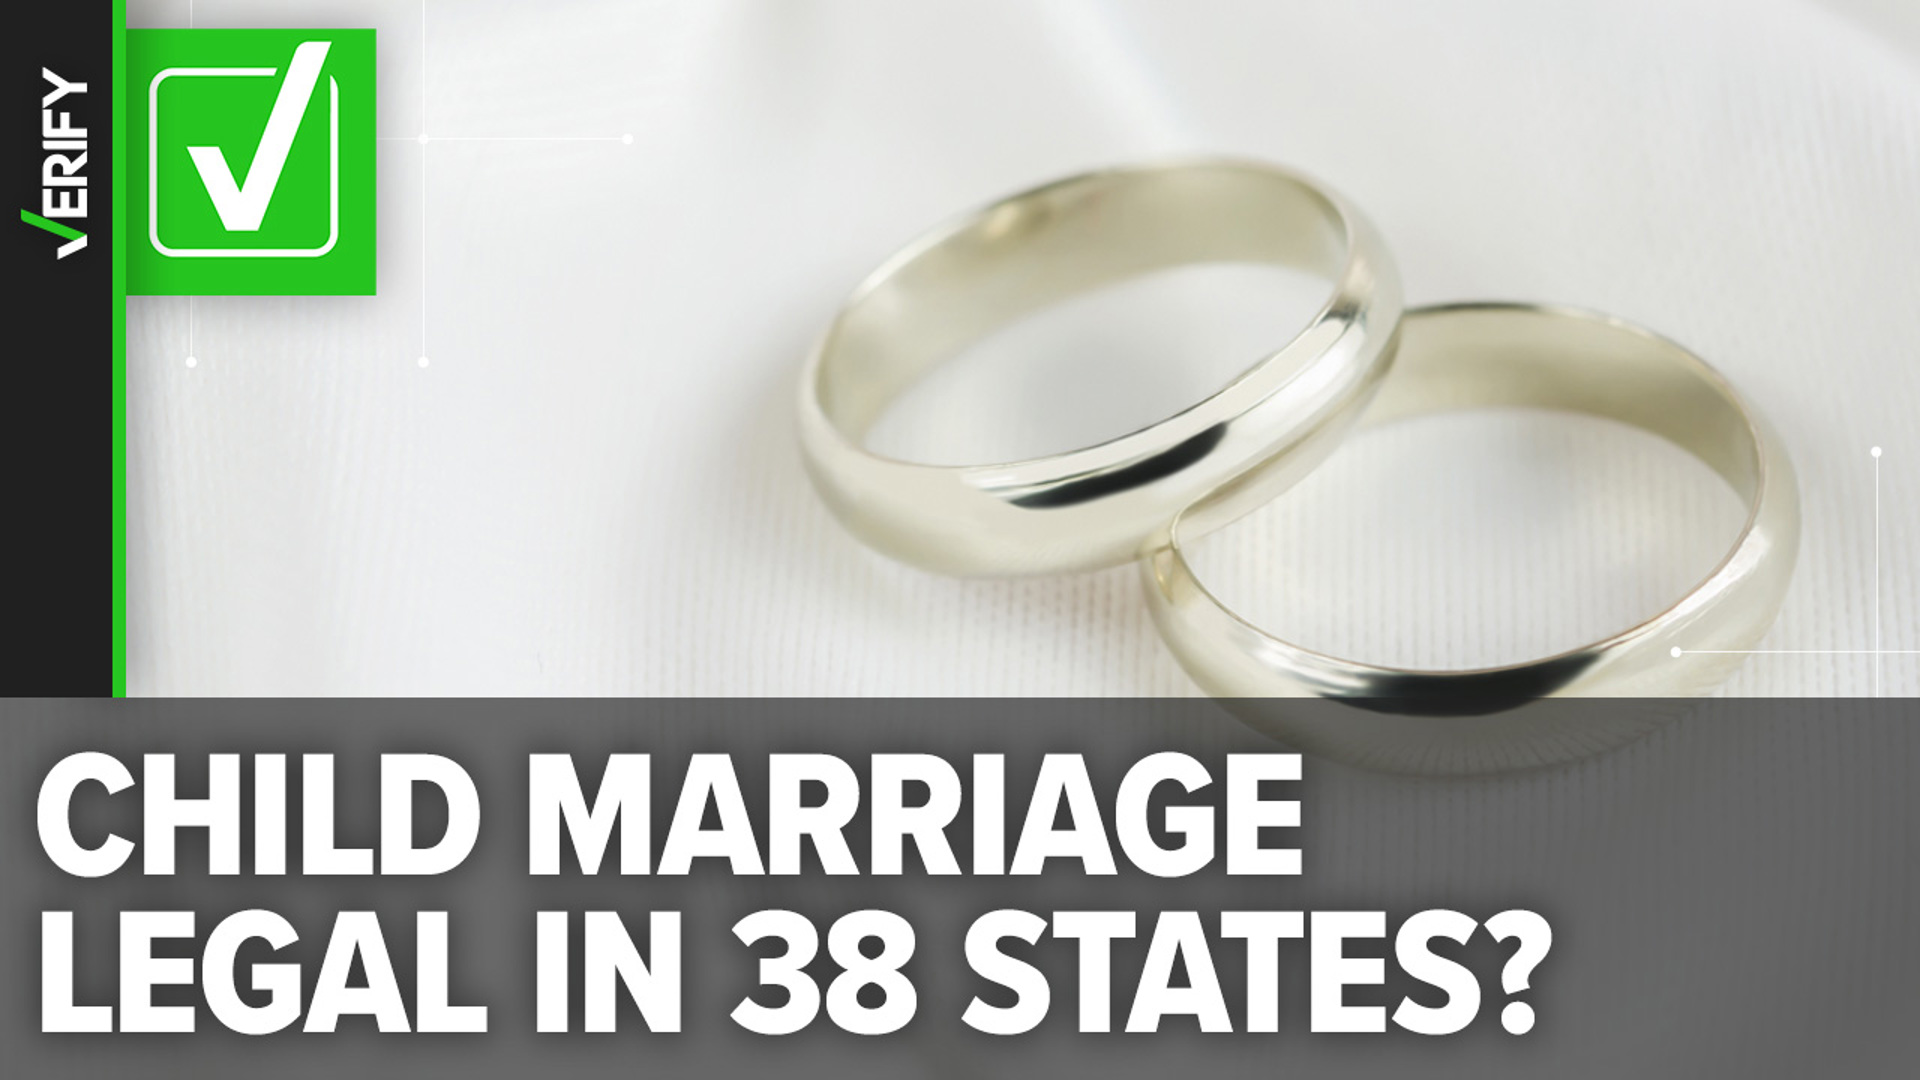 Viral social media posts that claim child marriage is legal in 38 states are actually true. Most of those states only allow it in limited circumstances.